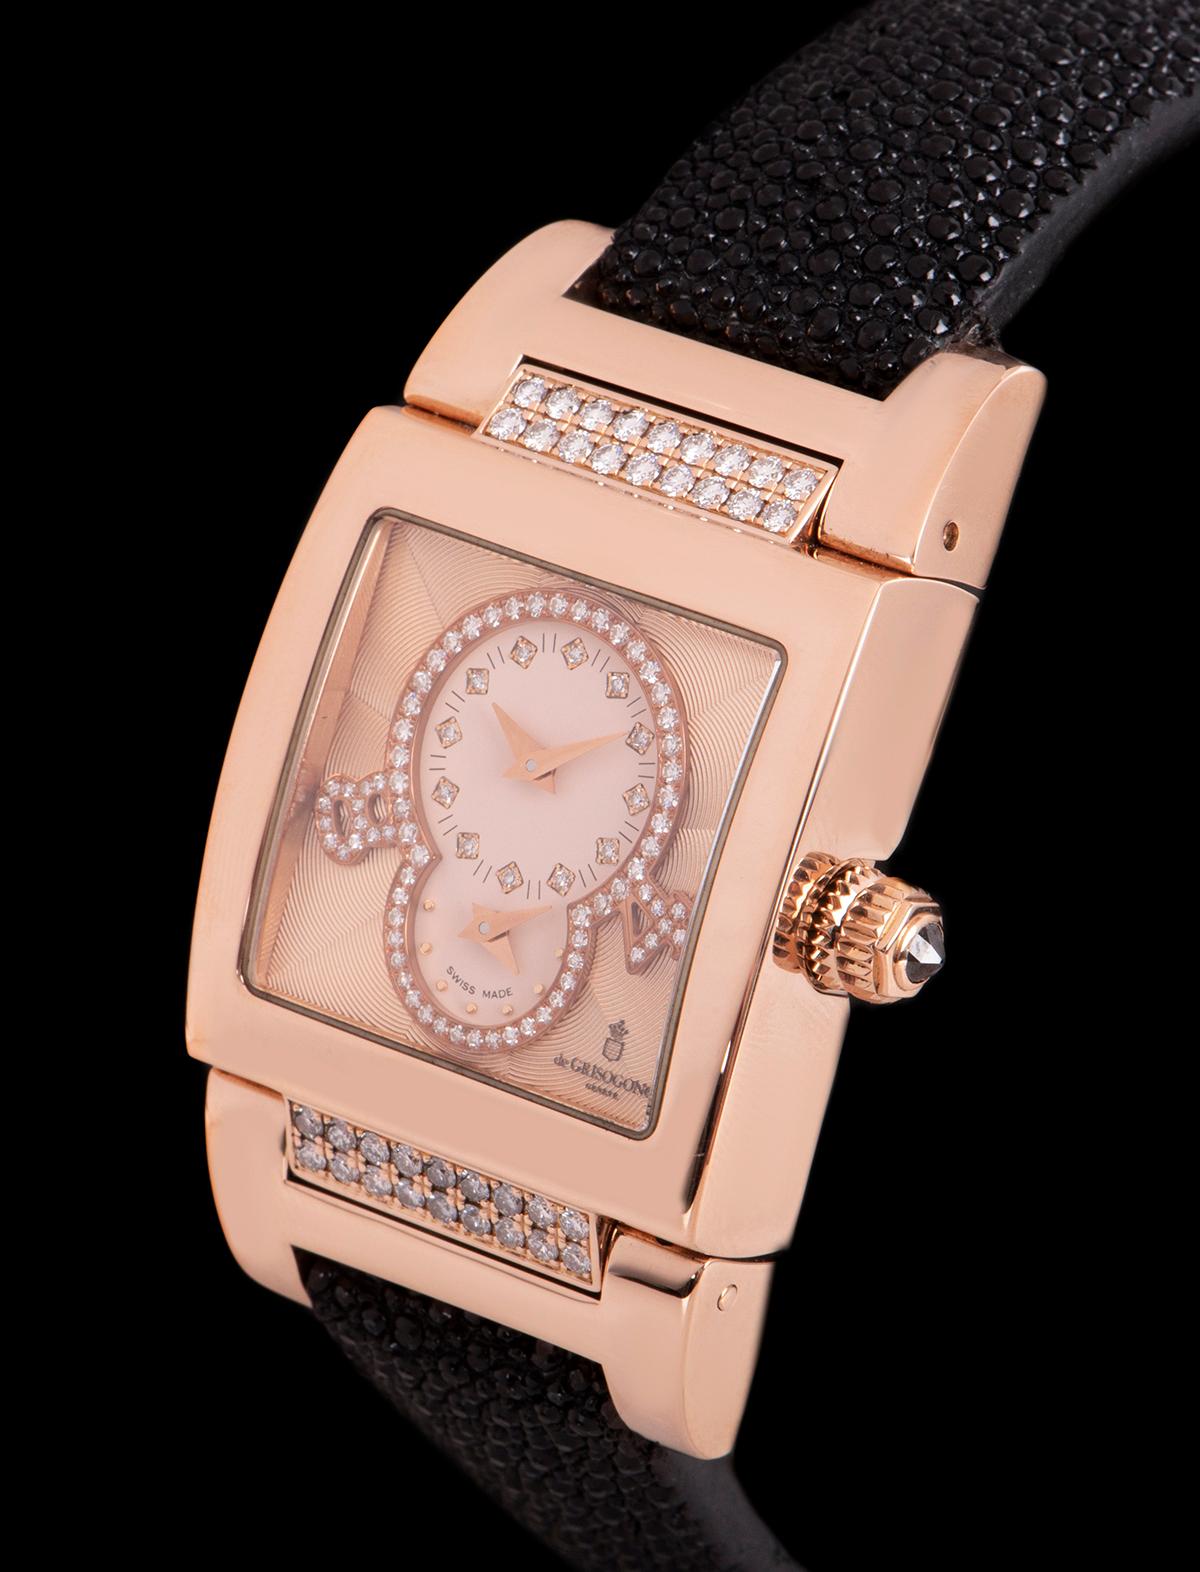 An 18k Rose Gold Instrumentino Dual Time Ladies Wristwatch, salmon pink guilloché dial set with 12 applied round brilliant cut diamond hour markers, second time zone at 6 0'clock, a ring set with 50 round brilliant cut diamonds and applied diamond